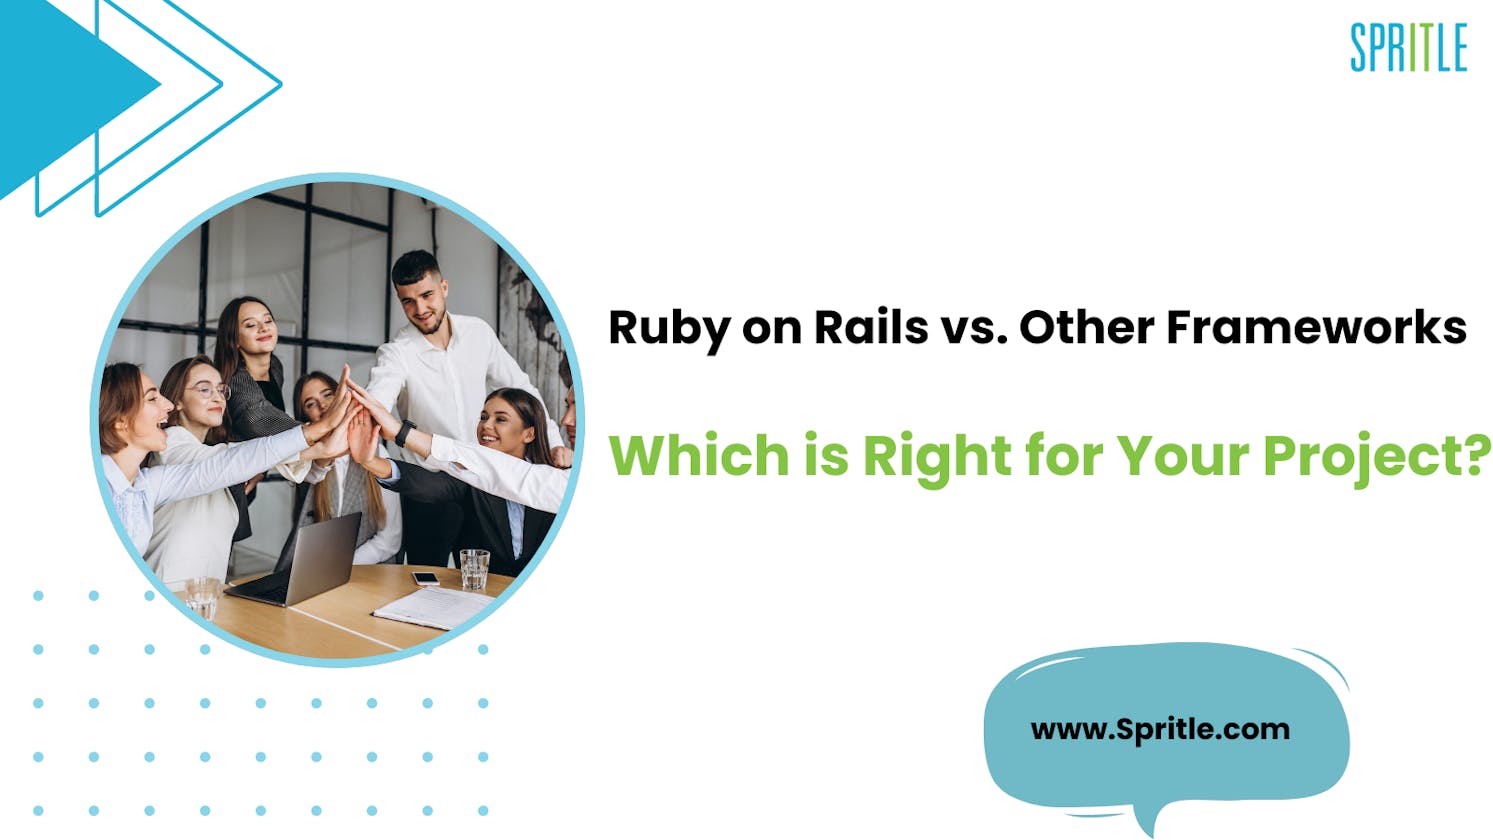 Ruby on Rails vs. Other Frameworks: Which is Right for Your Project?